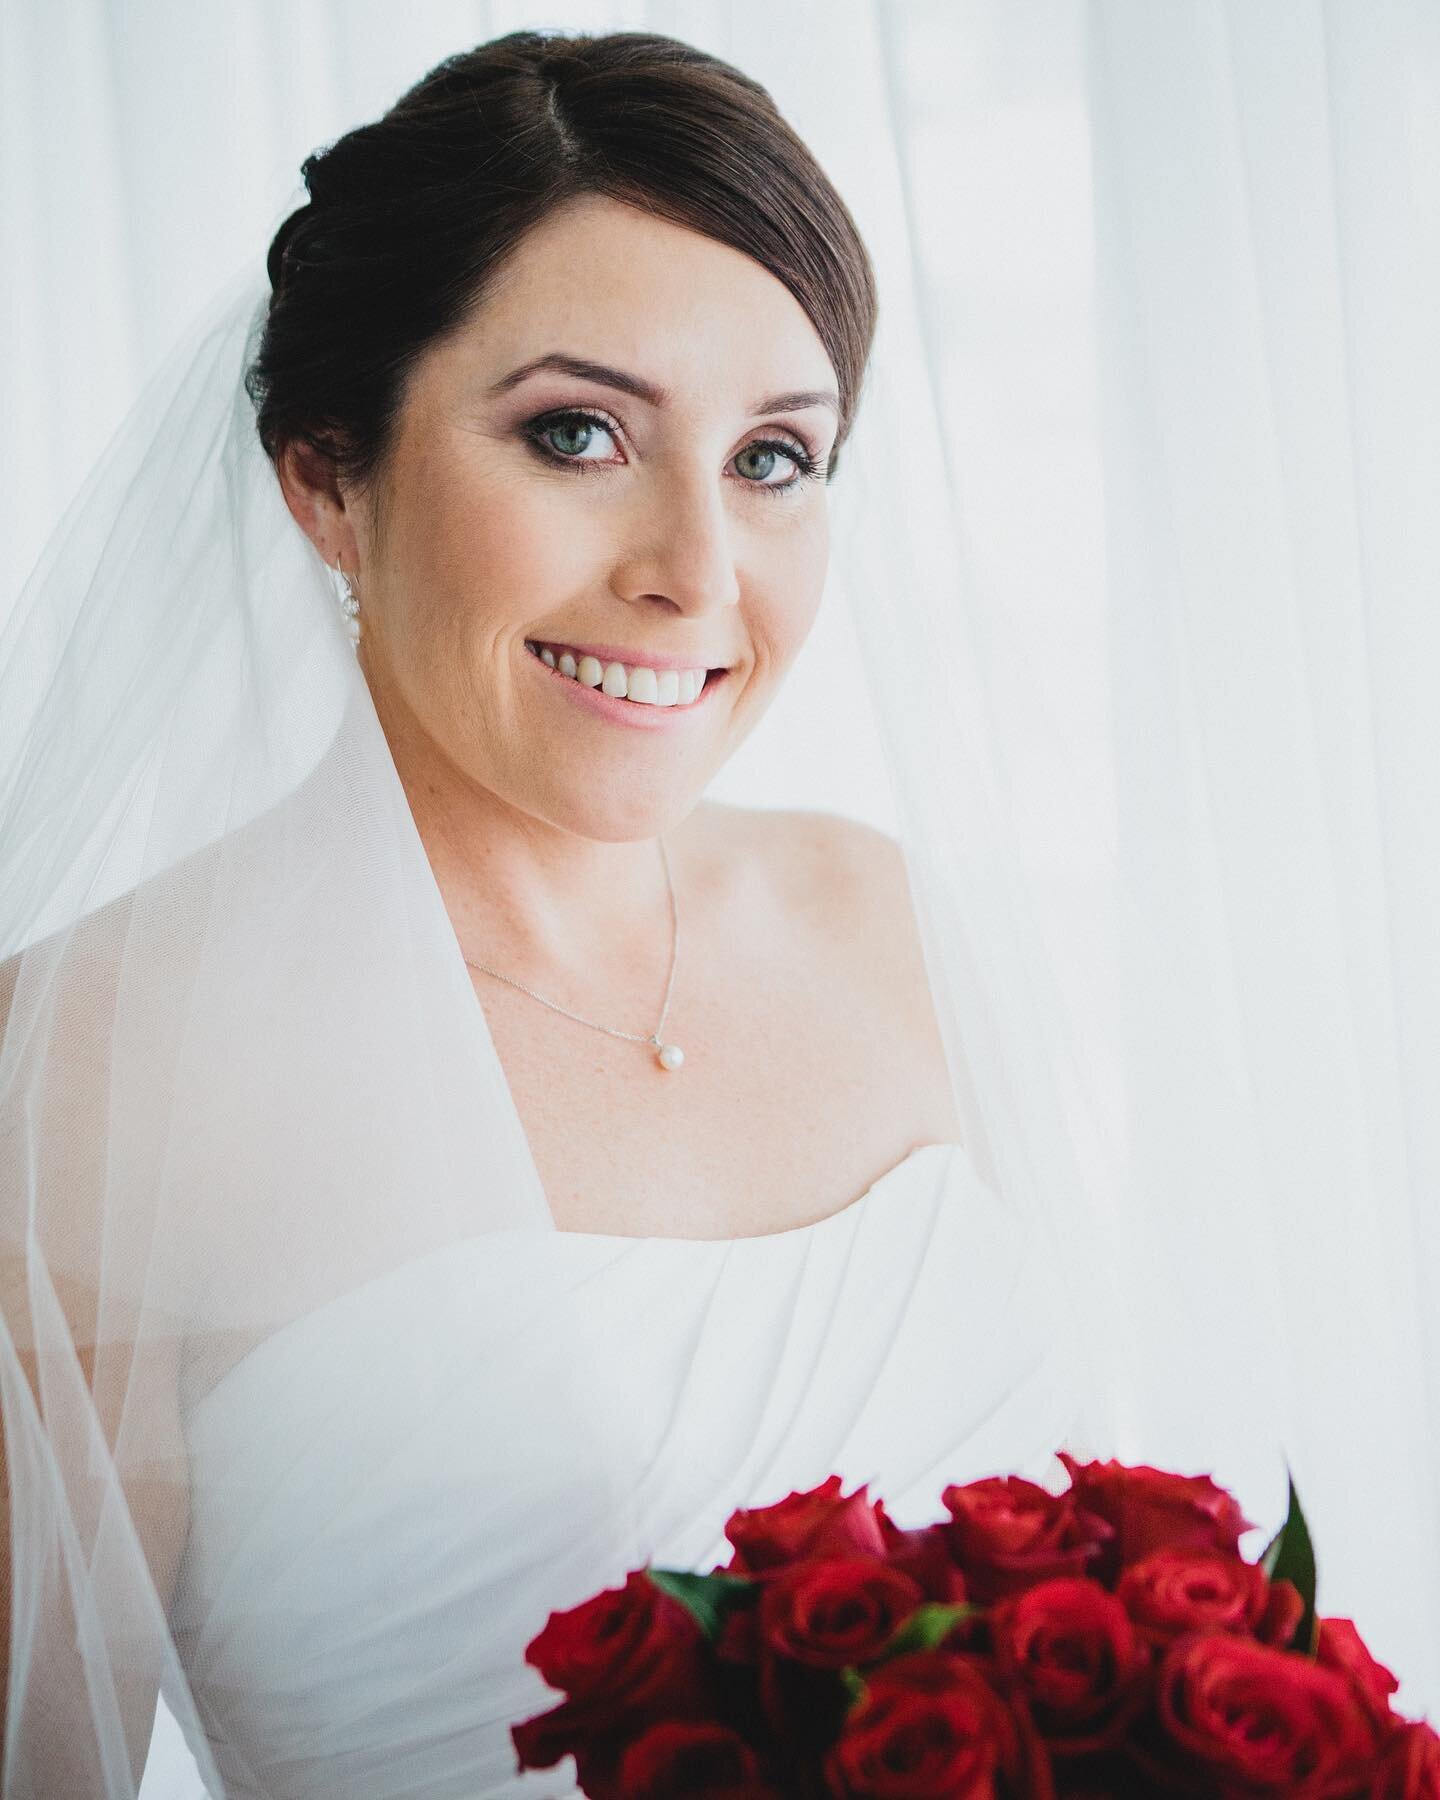 The perfect bridal makeup is all about enhancing natural beauty and bringing out the radiance of a bride! 🤍🤍

Makeup by @kateashmanmakeup 

#bridalmakeupartist #bridetobe #melbournewedding #melbournemakeupartist #weddingmakeupinspo #southyarramakeu